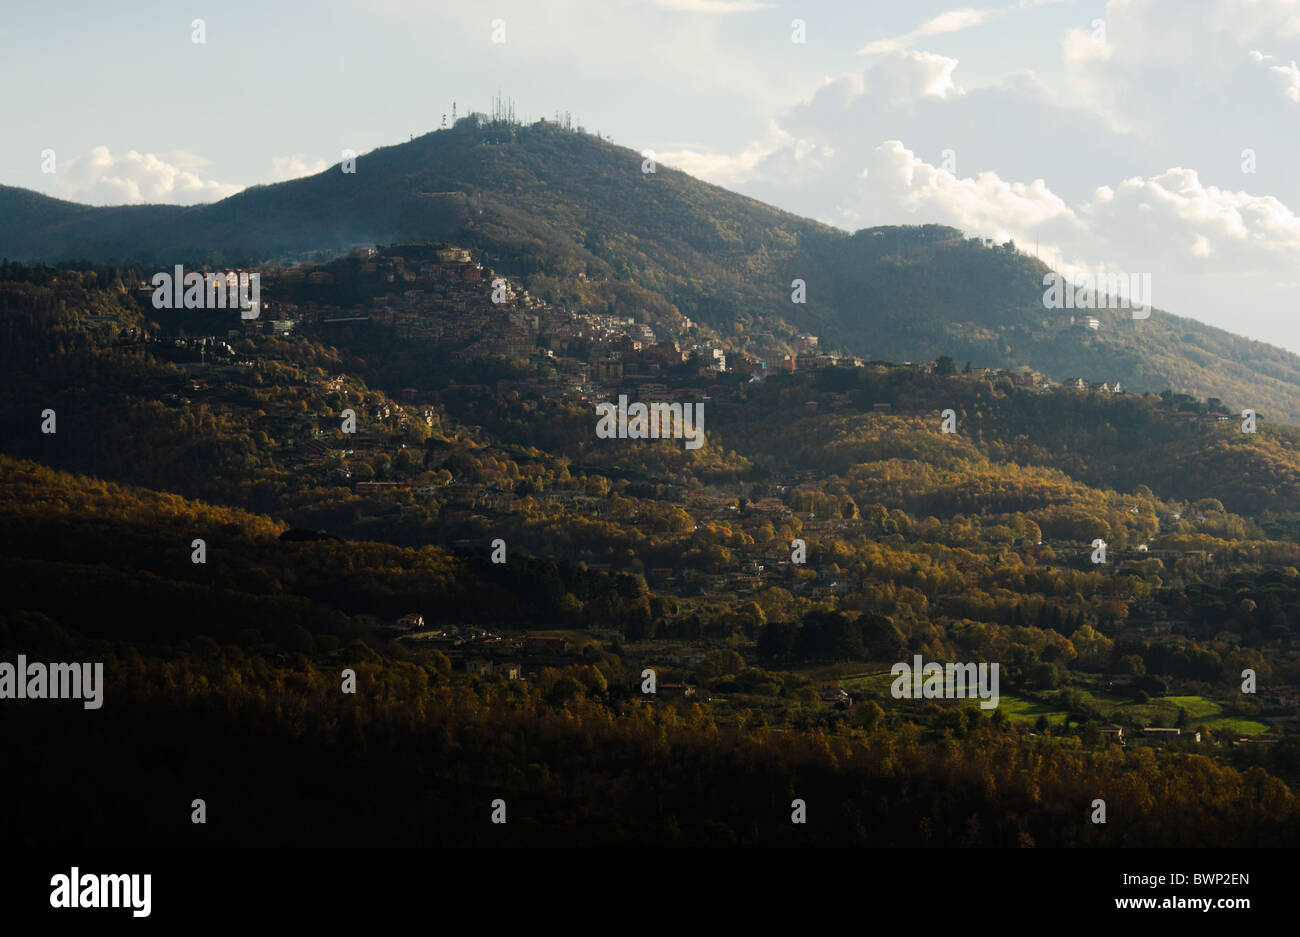 View of Rocca di Papa town and Montecavo, from mount Tuscolo, on a cloudy day, autumn season. Stock Photo